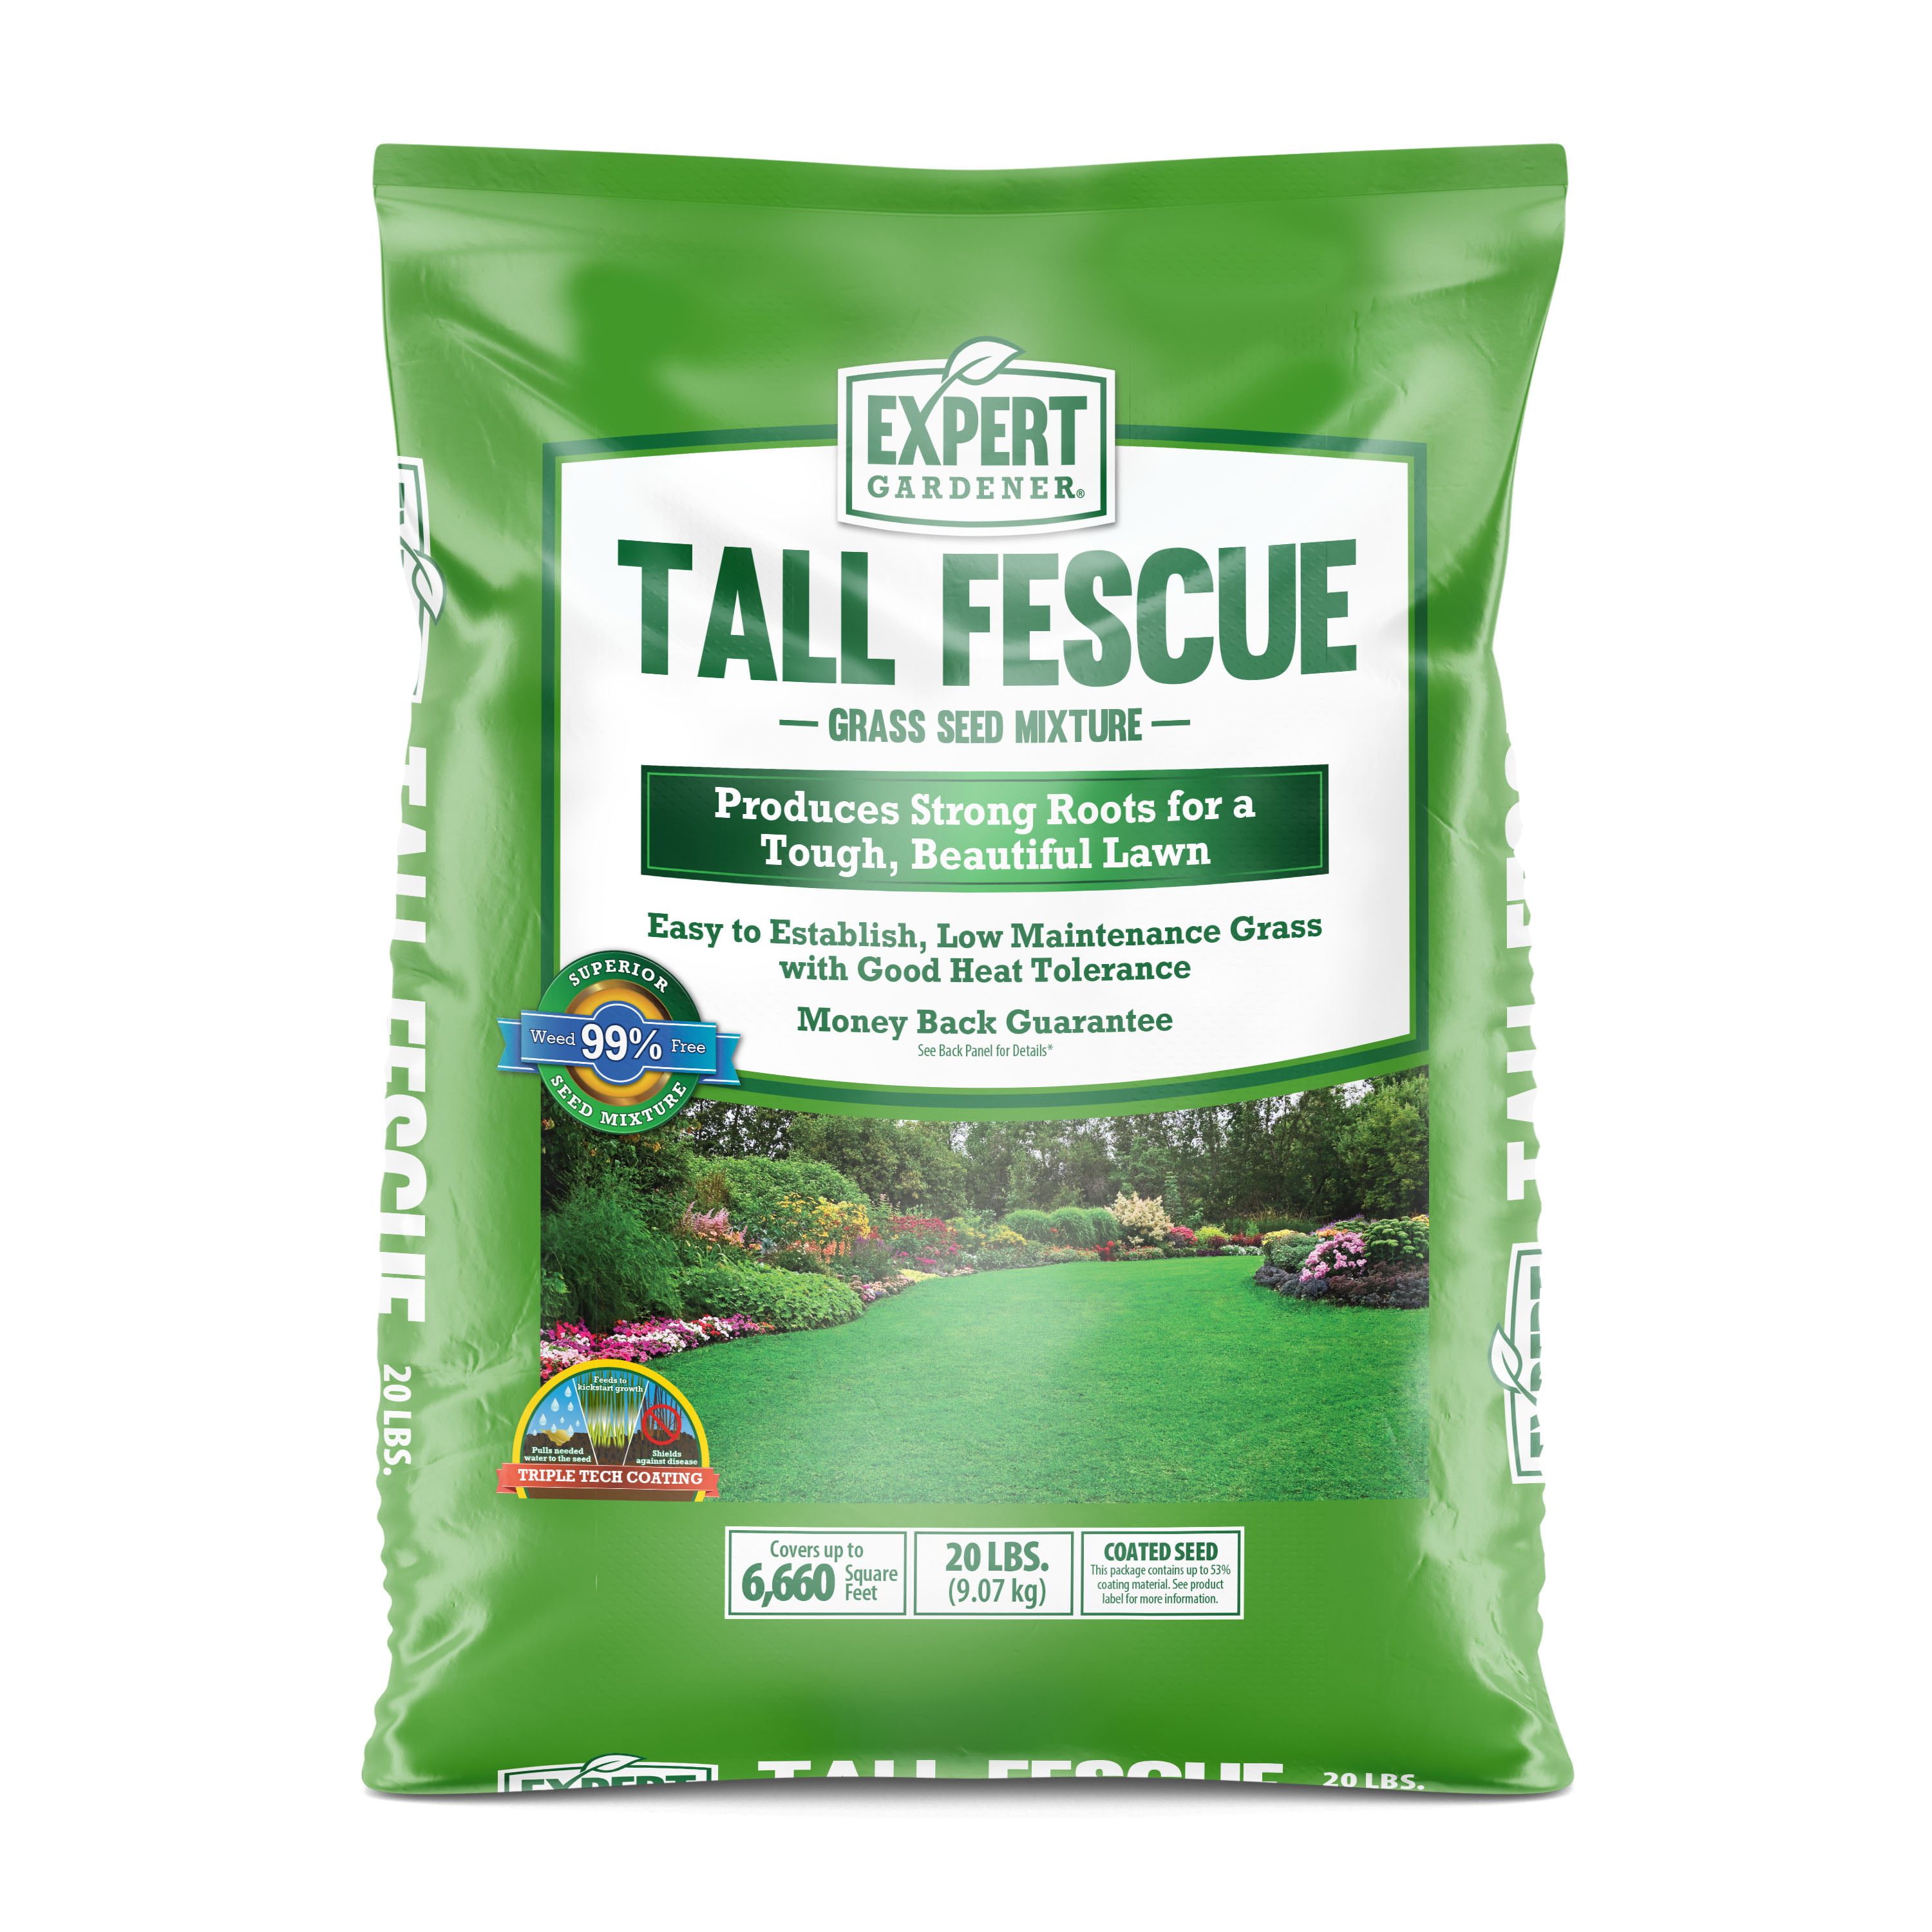 Tall Fescue Seed Home Depot 